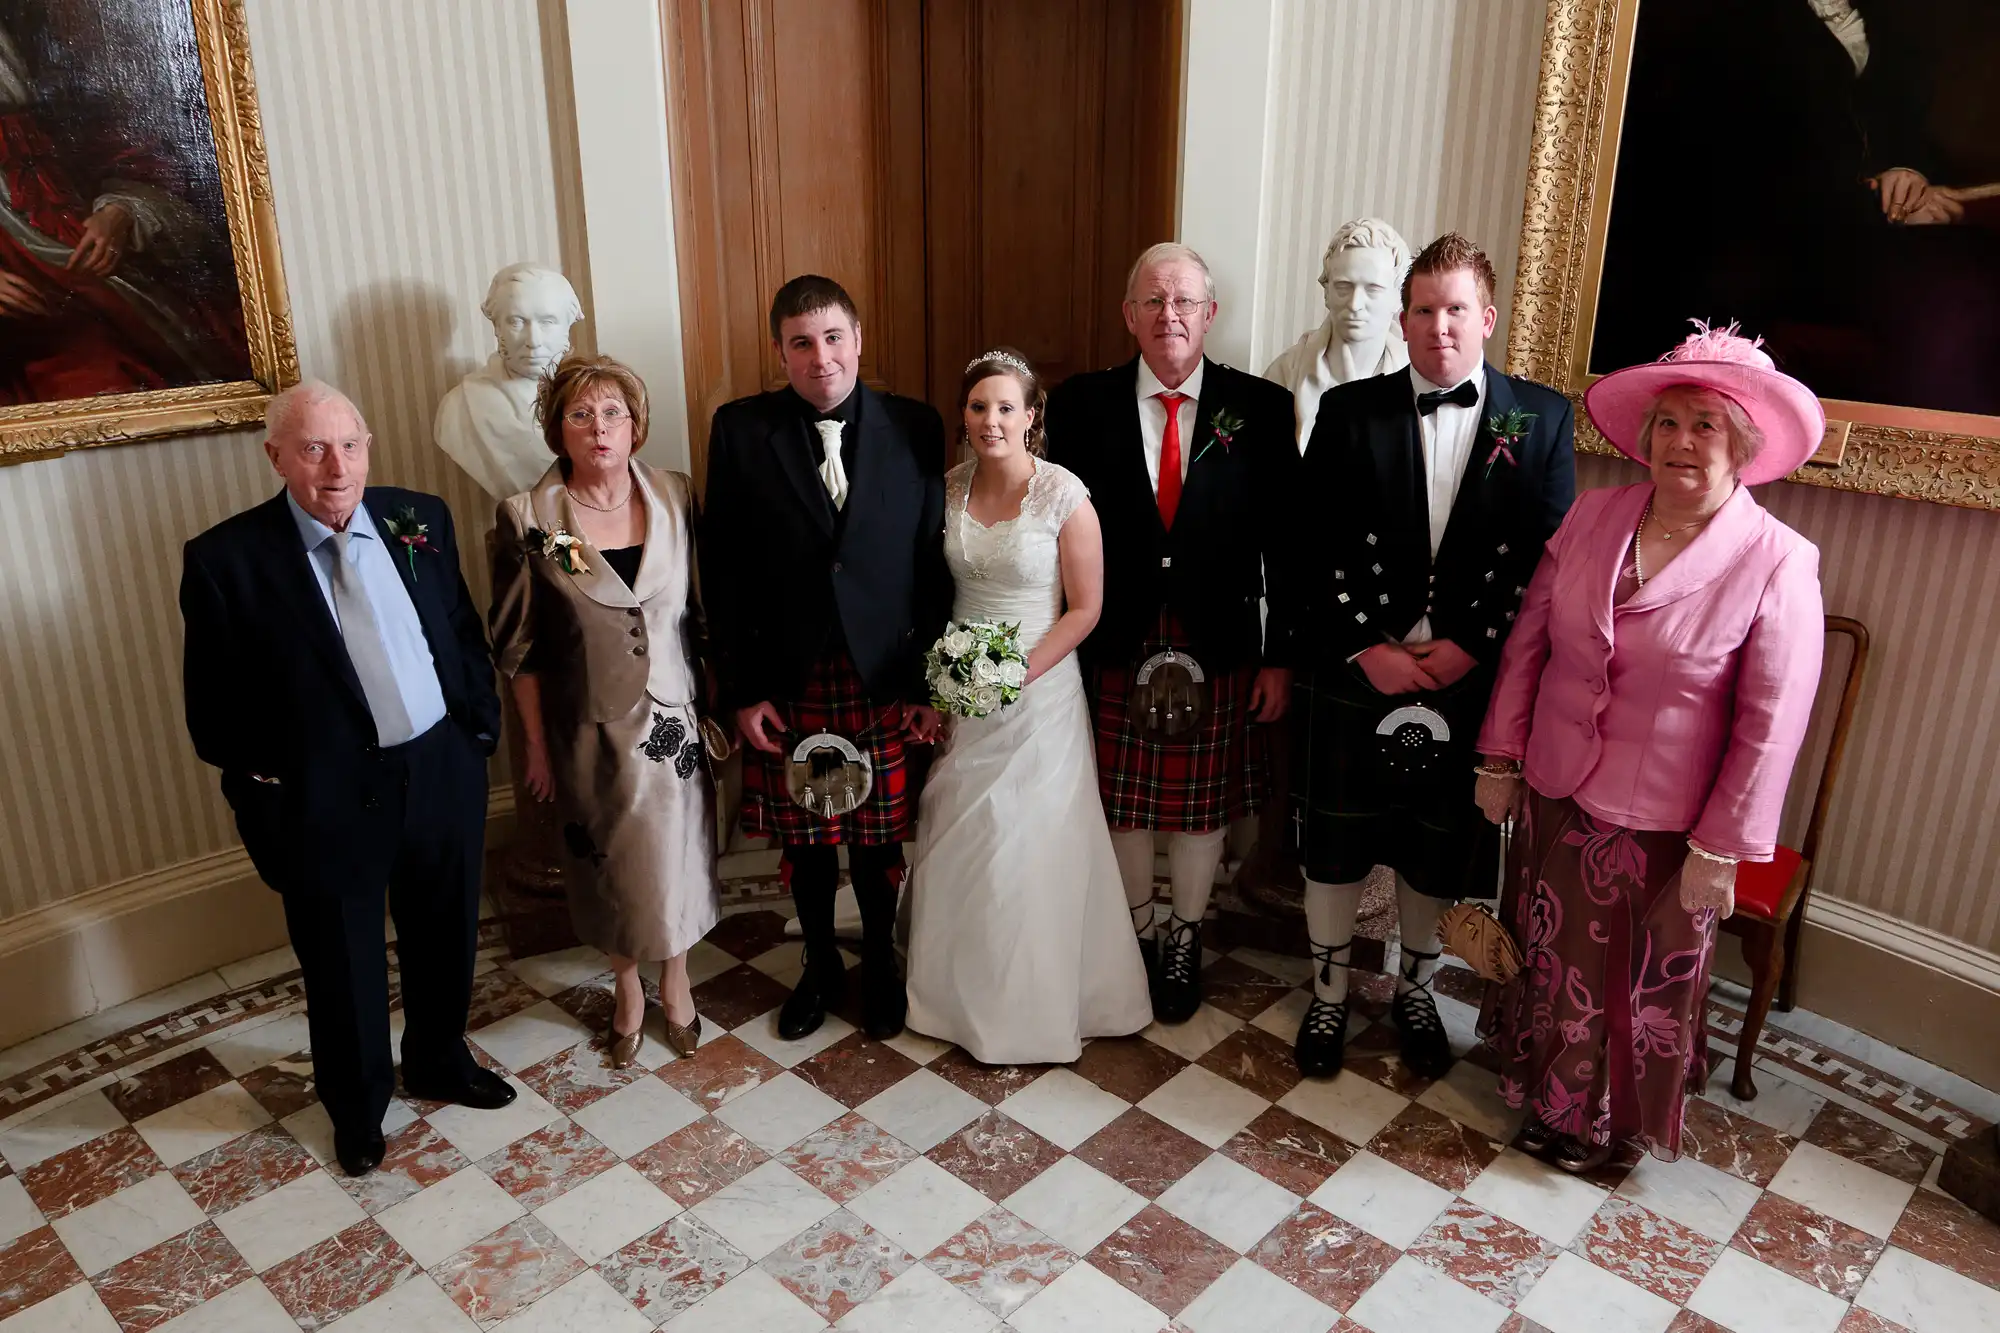 A formal family portrait at a wedding with eight people, some wearing kilts and others in traditional dresses, standing in a room with classical decor.